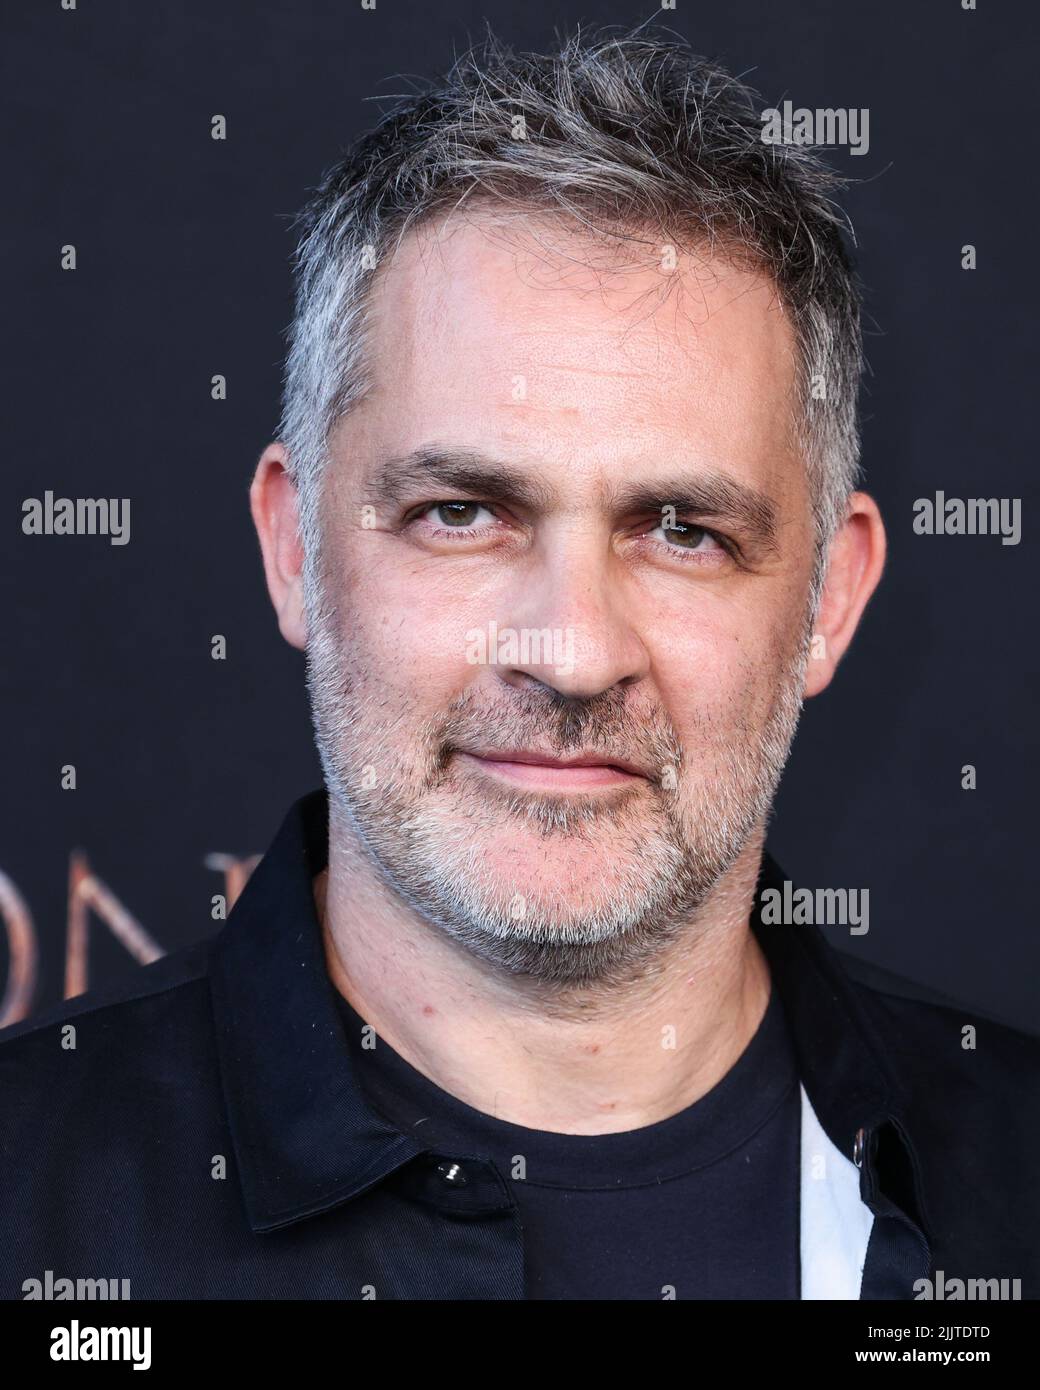 LOS ANGELES, CALIFORNIA, USA - JULY 27: English director Miguel Sapochnik arrives at the World Premiere Of HBO's Original Drama Series 'House Of The Dragon' Season 1 held at the Academy Museum of Motion Pictures on July 27, 2022 in Los Angeles, California, United States. (Photo by Xavier Collin/Image Press Agency) Stock Photo